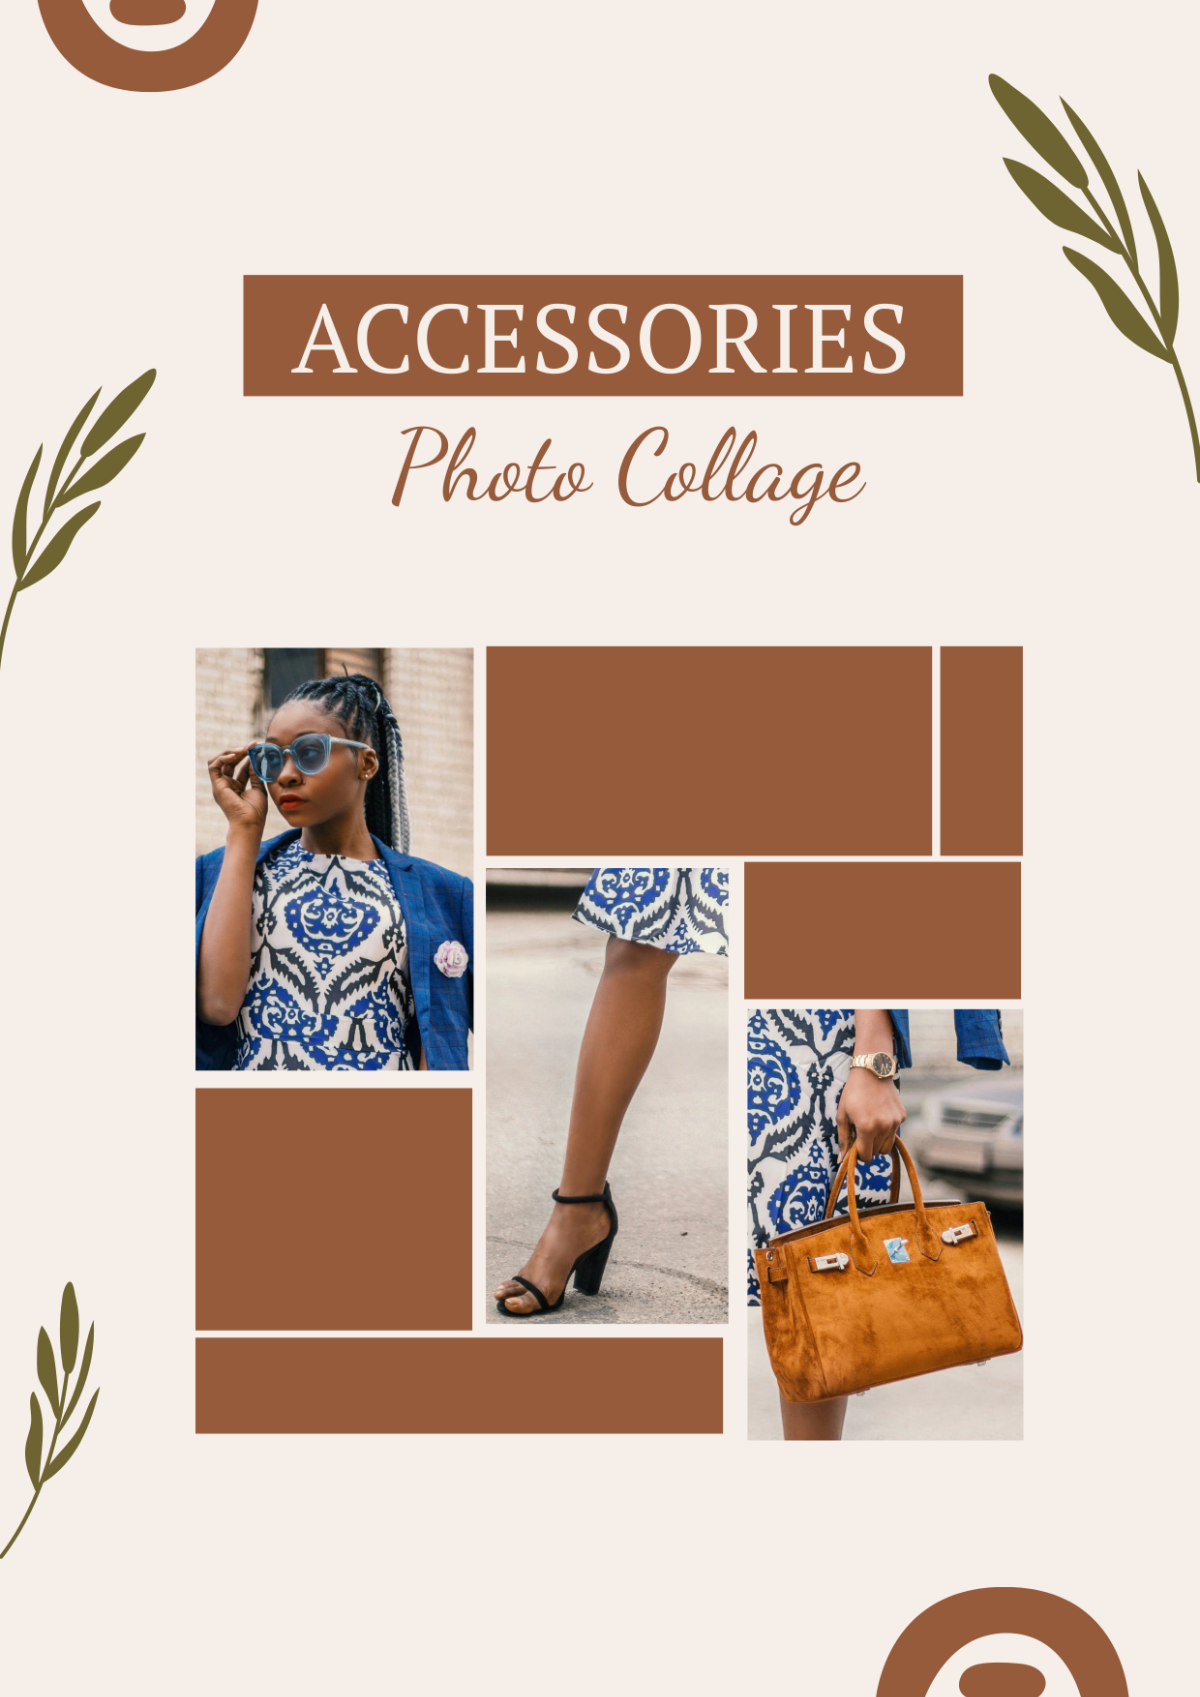 Free Accessories Photo Collage Template